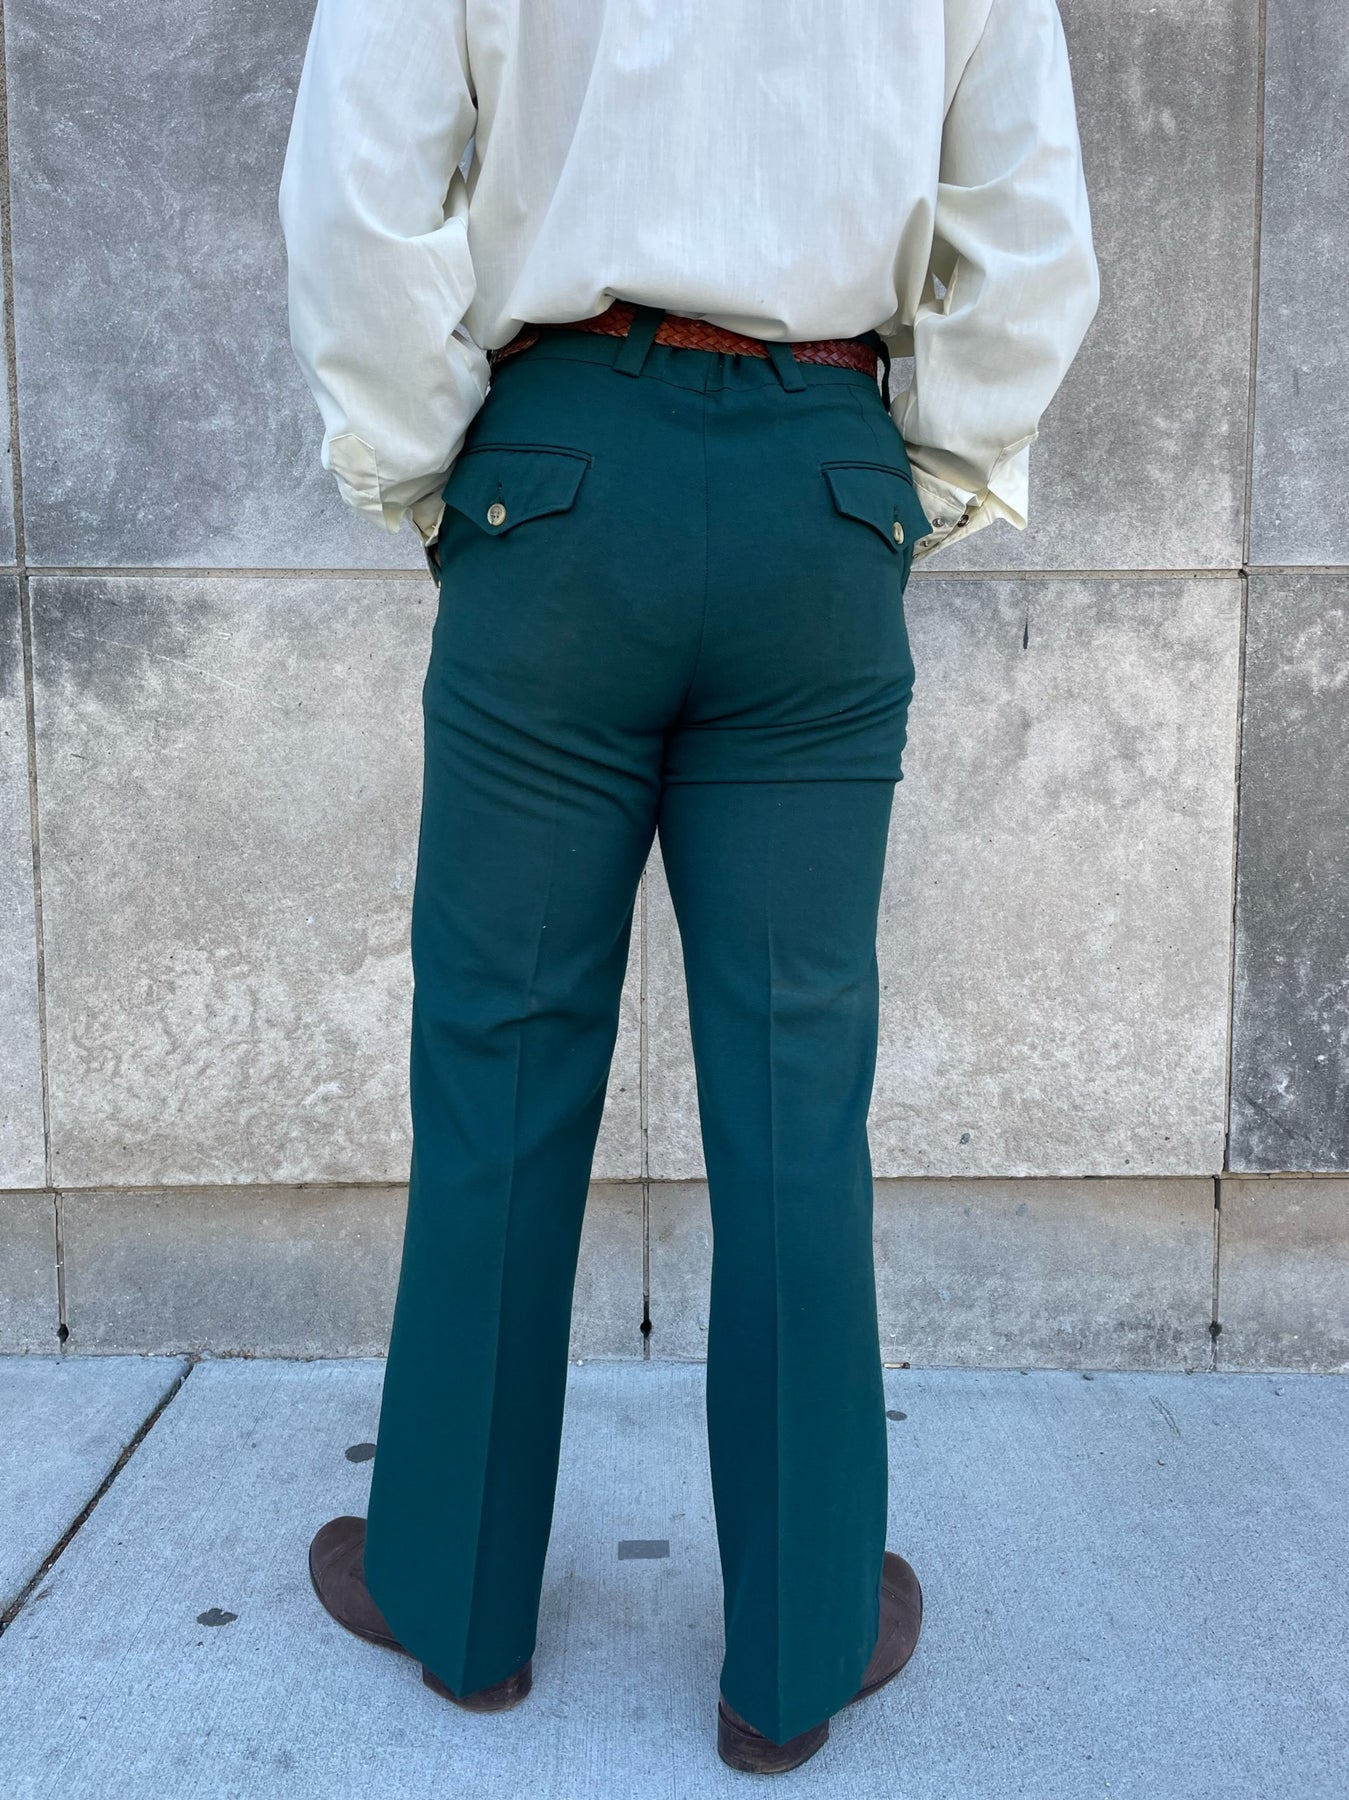 Mens 70s Vintage Green Bell Bottom Polyester Pants, Levis Panatela  Signature Collection